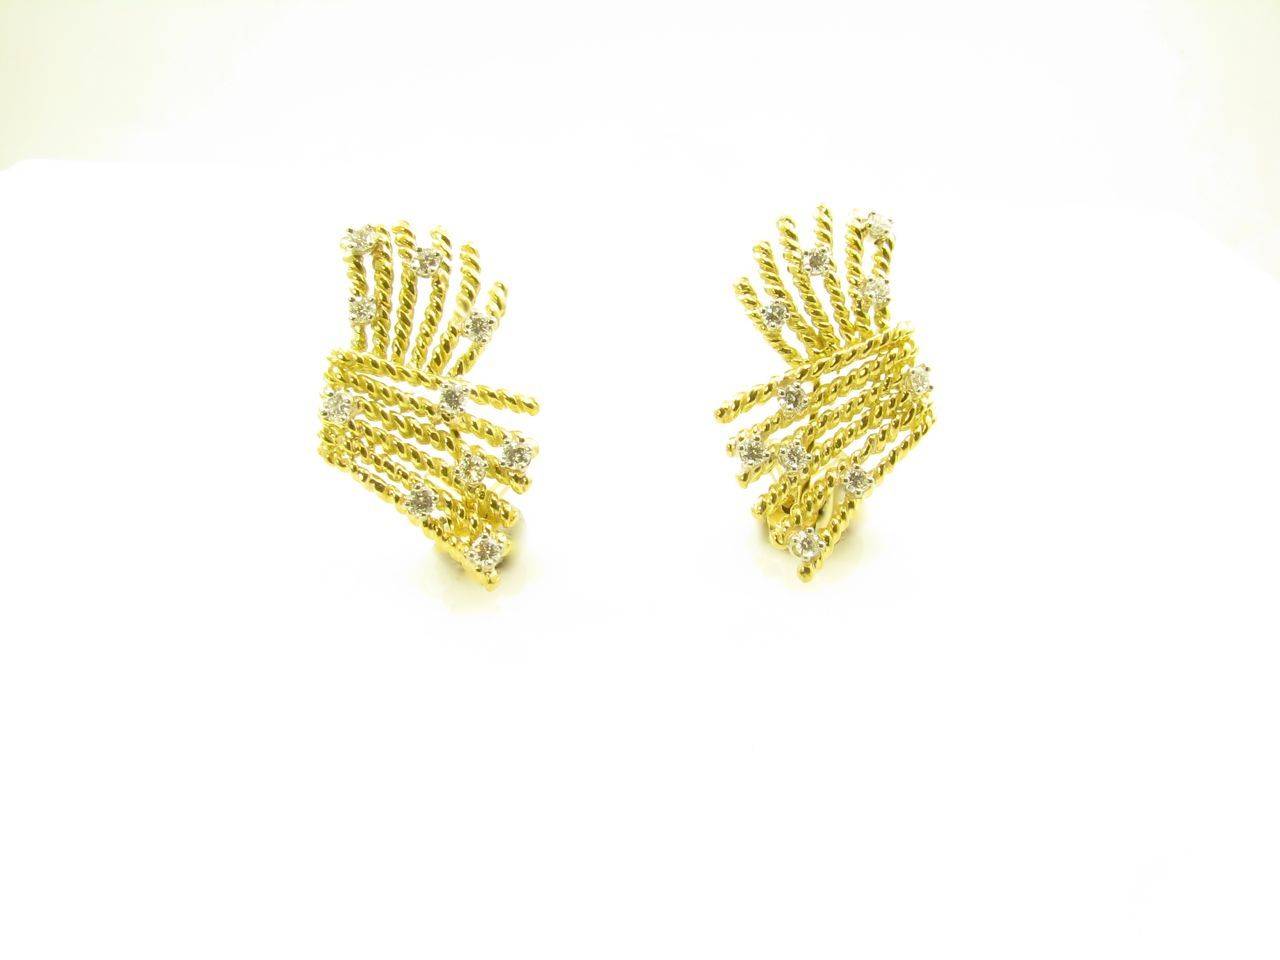 A pair of 18 karat yellow gold and platinum set diamond earrings.  Tiffany Schlumberger.  The design is known as the V-Rope, designed as wires of gold twisted together to form this rope design. Ear clips in 18k gold with round brilliant diamonds in